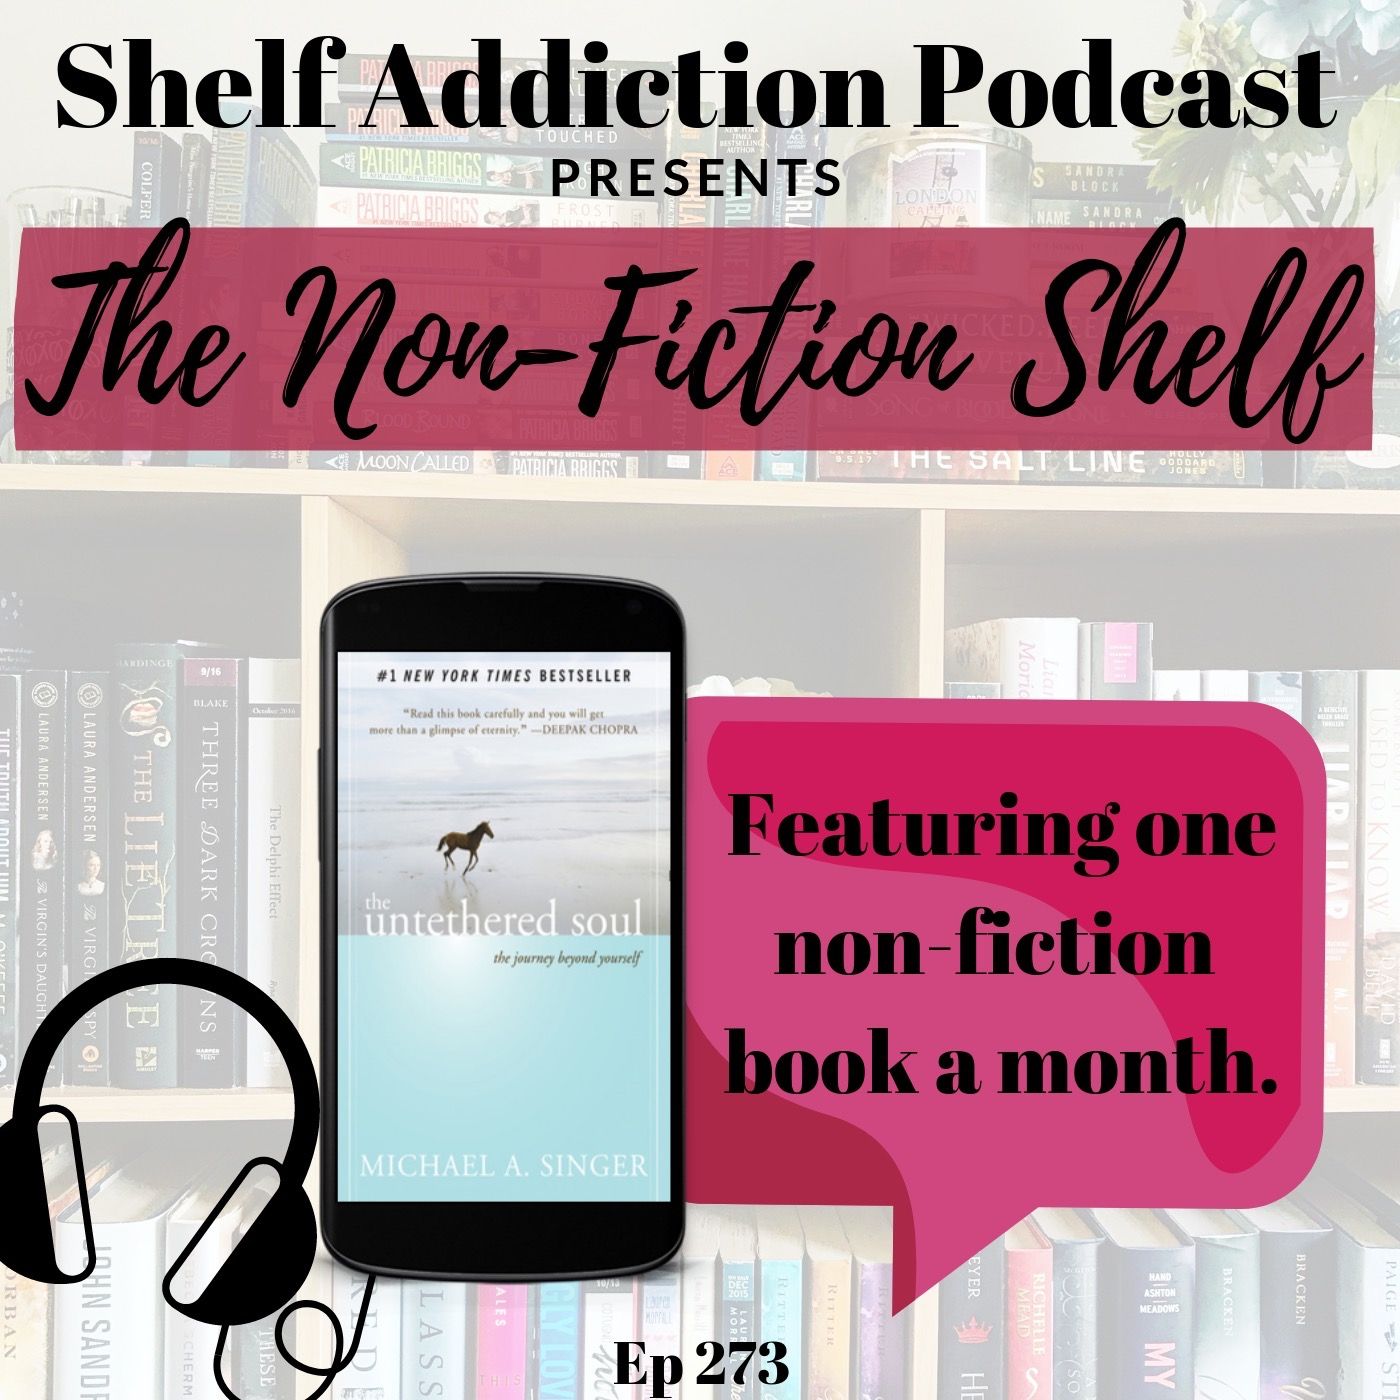 Review of The Untethered Soul | The Non-Fiction Shelf